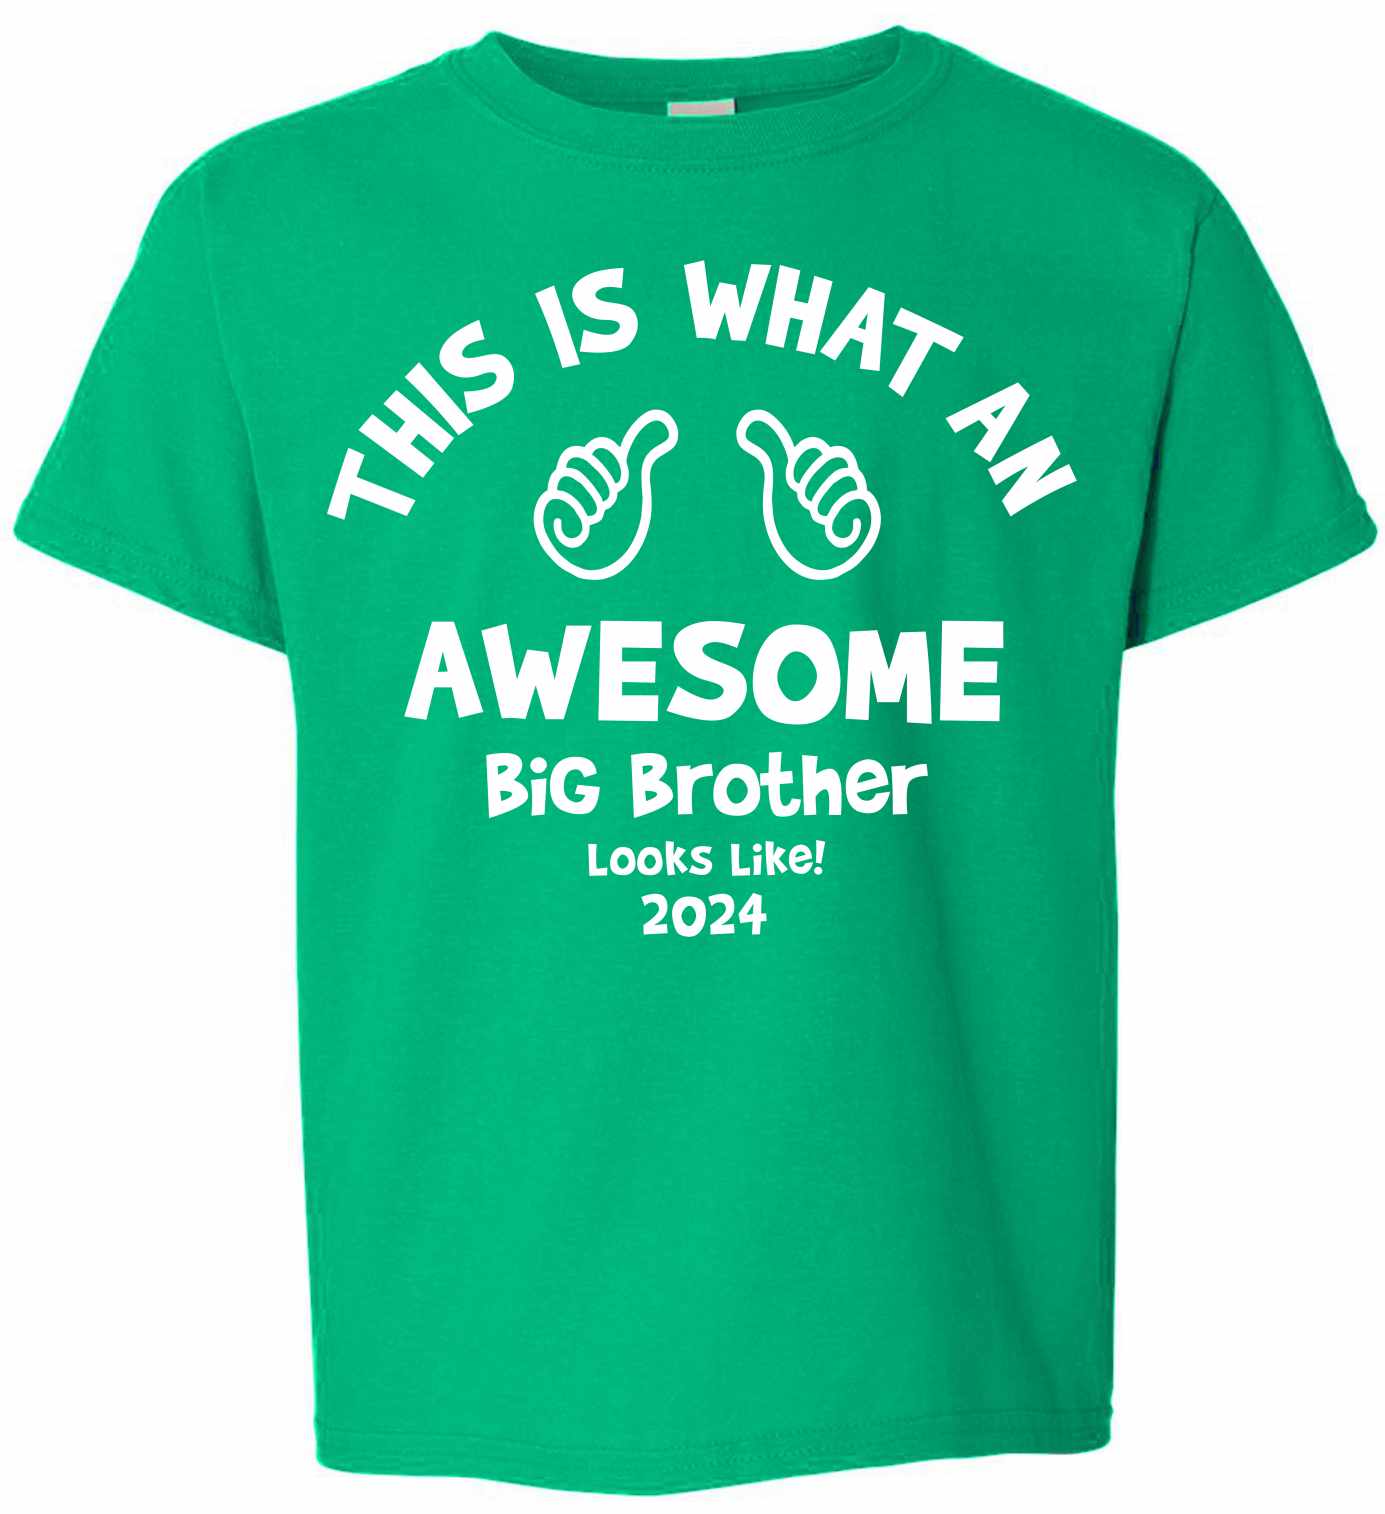 Awesome Big Brother in 2024 on Kids T-Shirt